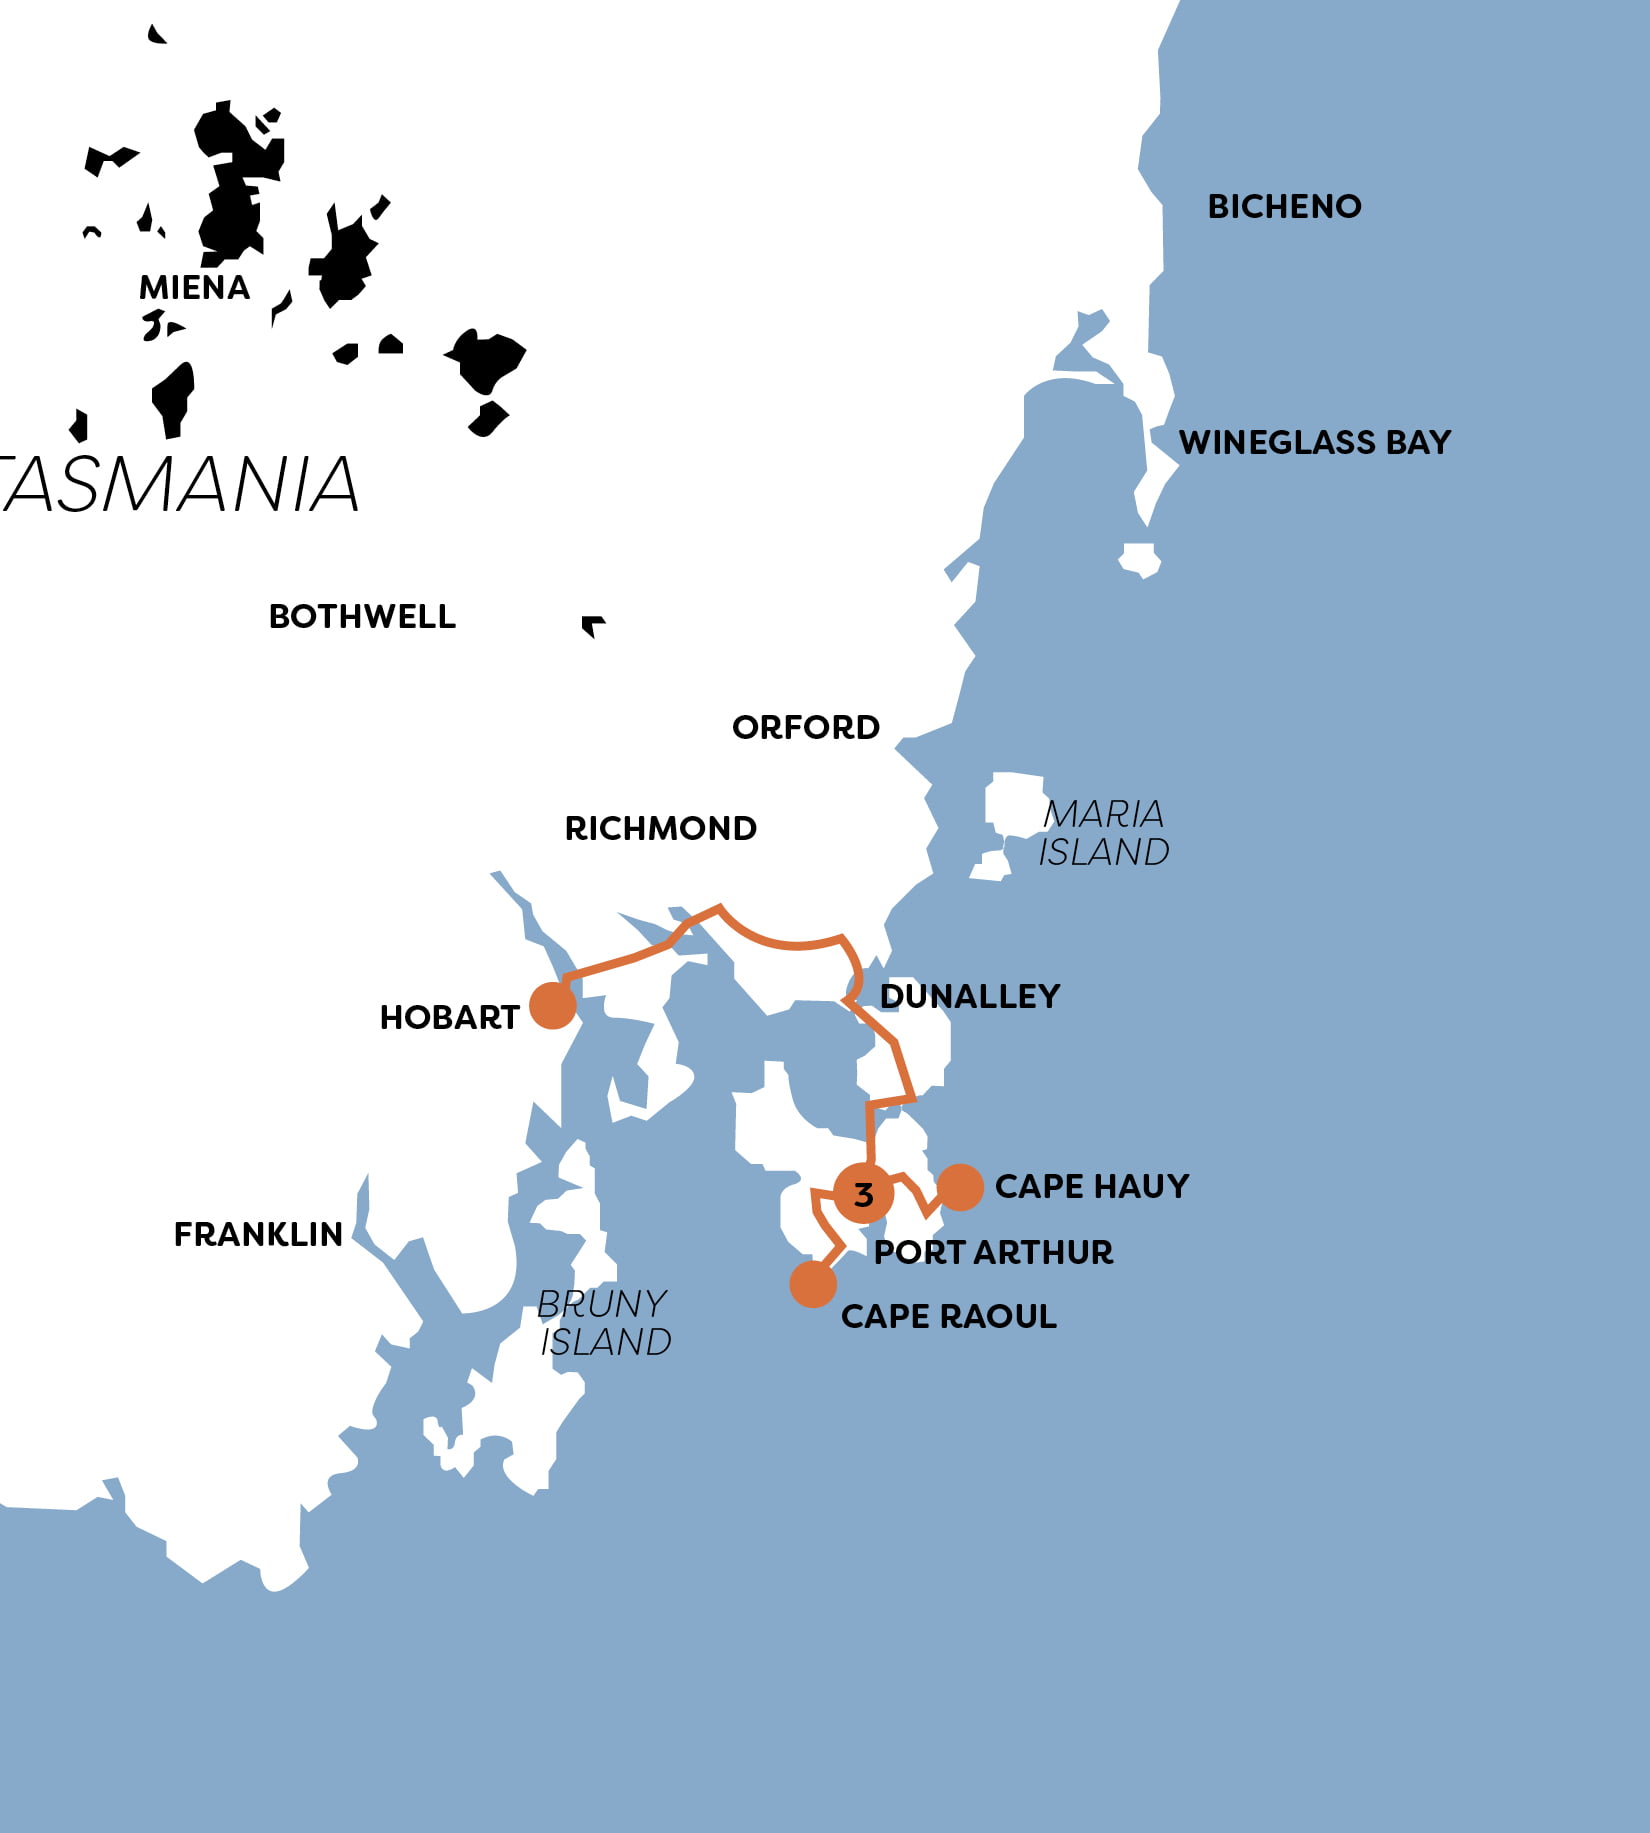 A map of Tasmania with highlighted destinations of Cape Hauy, Cape Raoul and Port Arthur